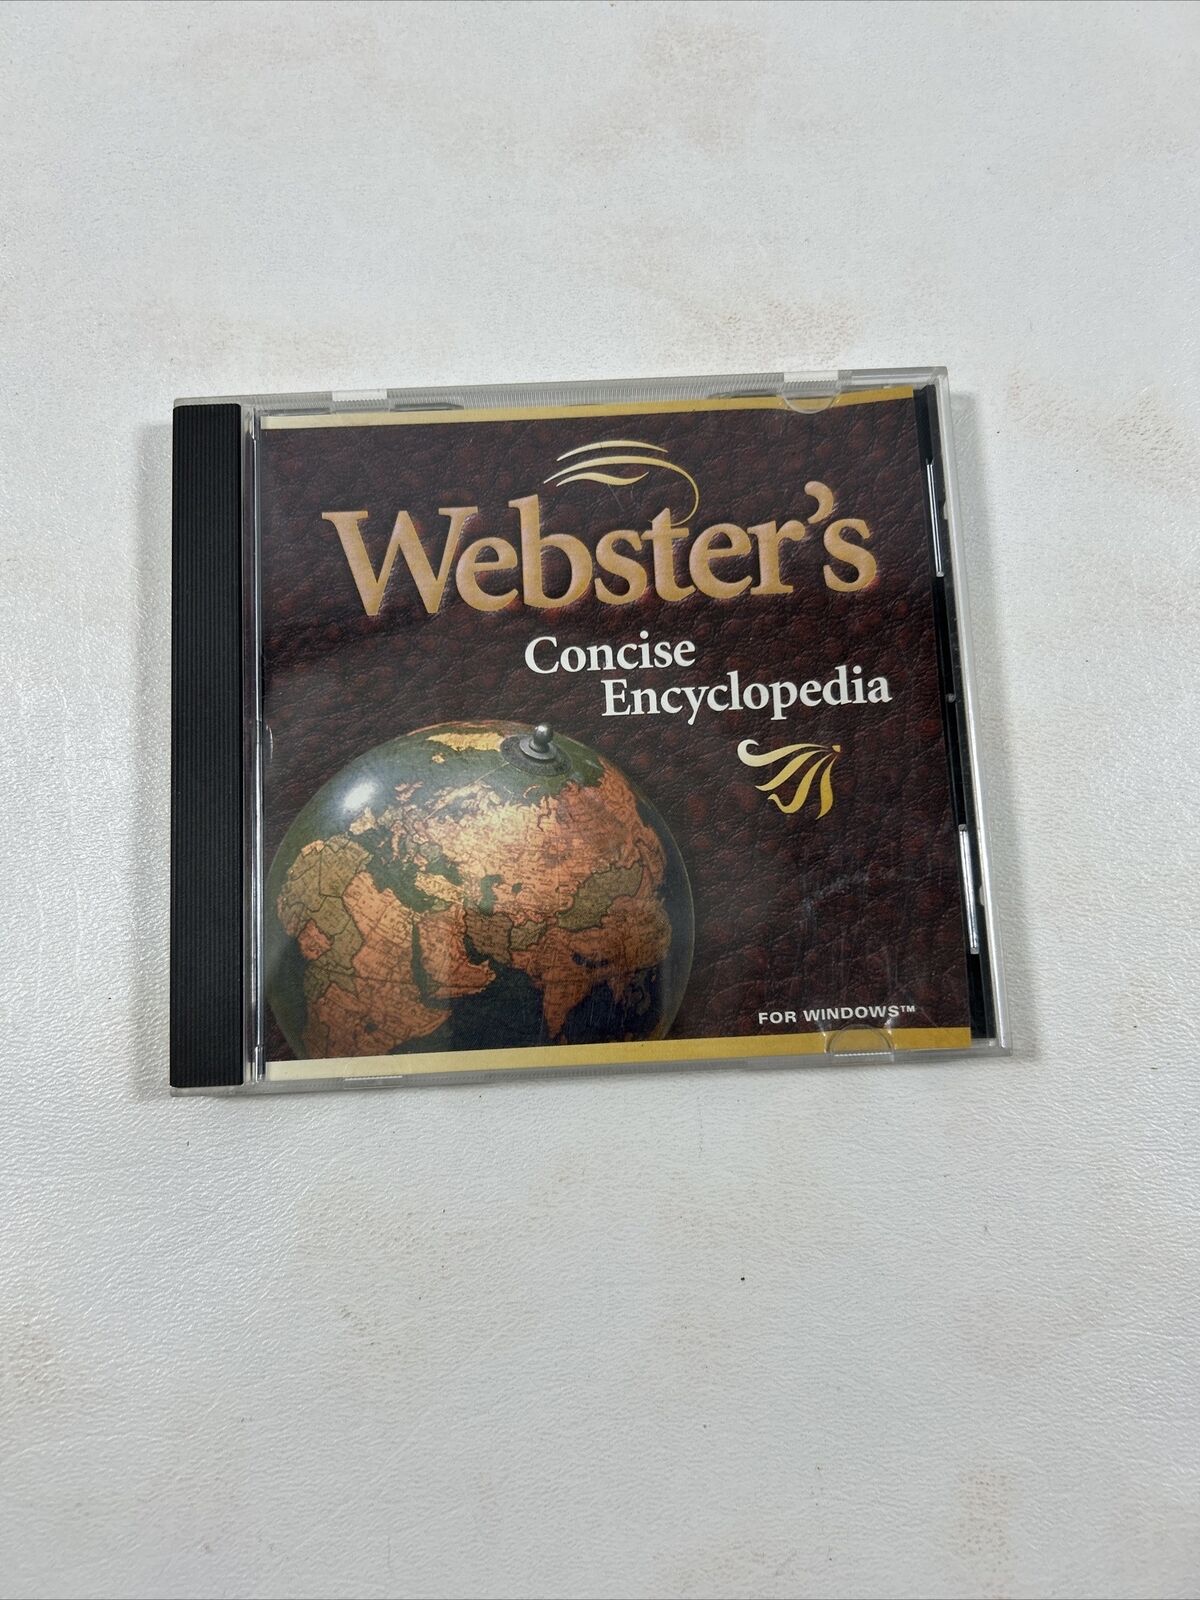 Webster's Concise Encyclopedia PC CD-ROM 1996 Windows 95/3.1